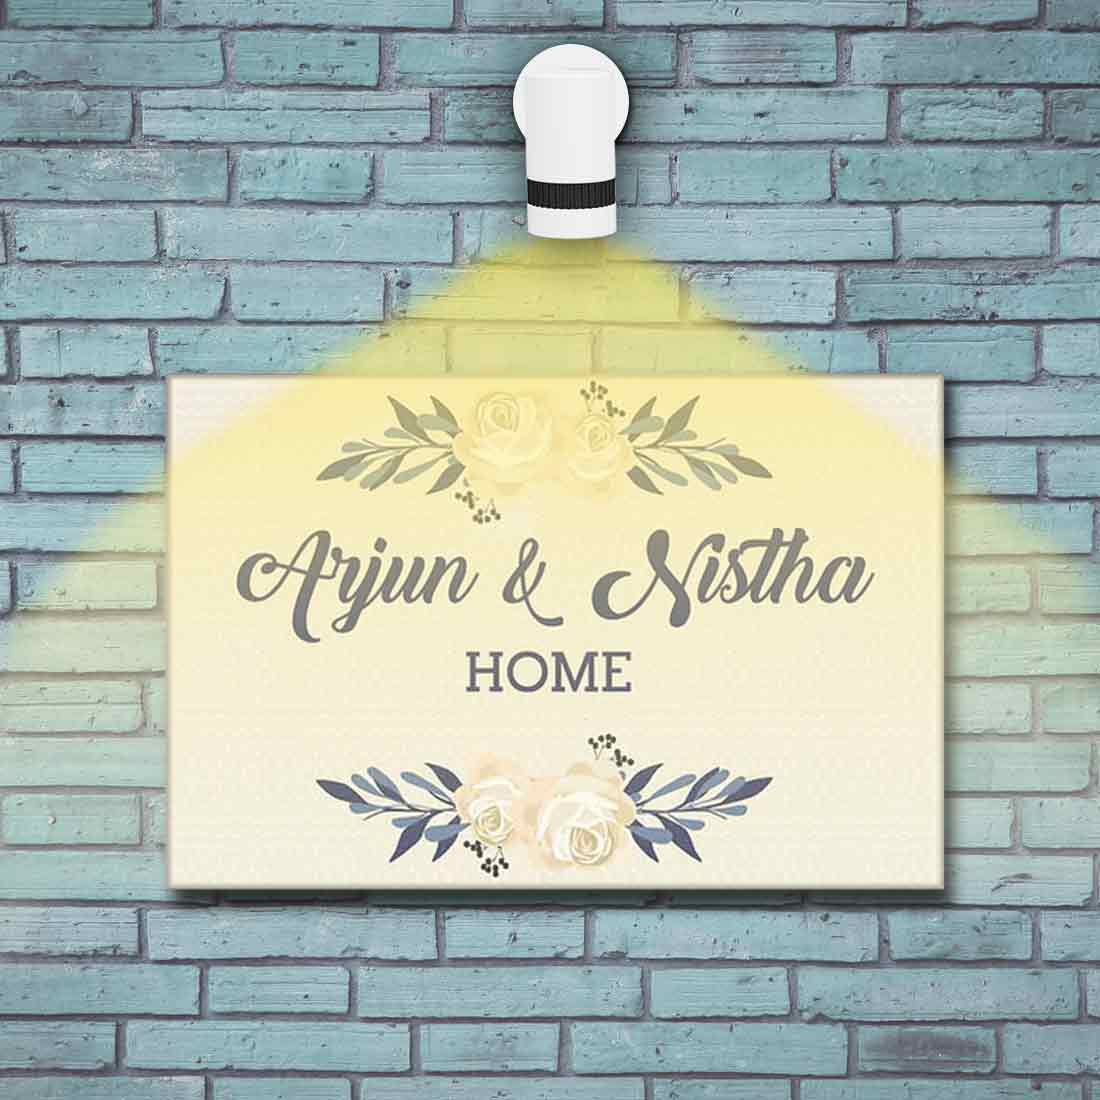 Customized Name Plate for Home - Minimal